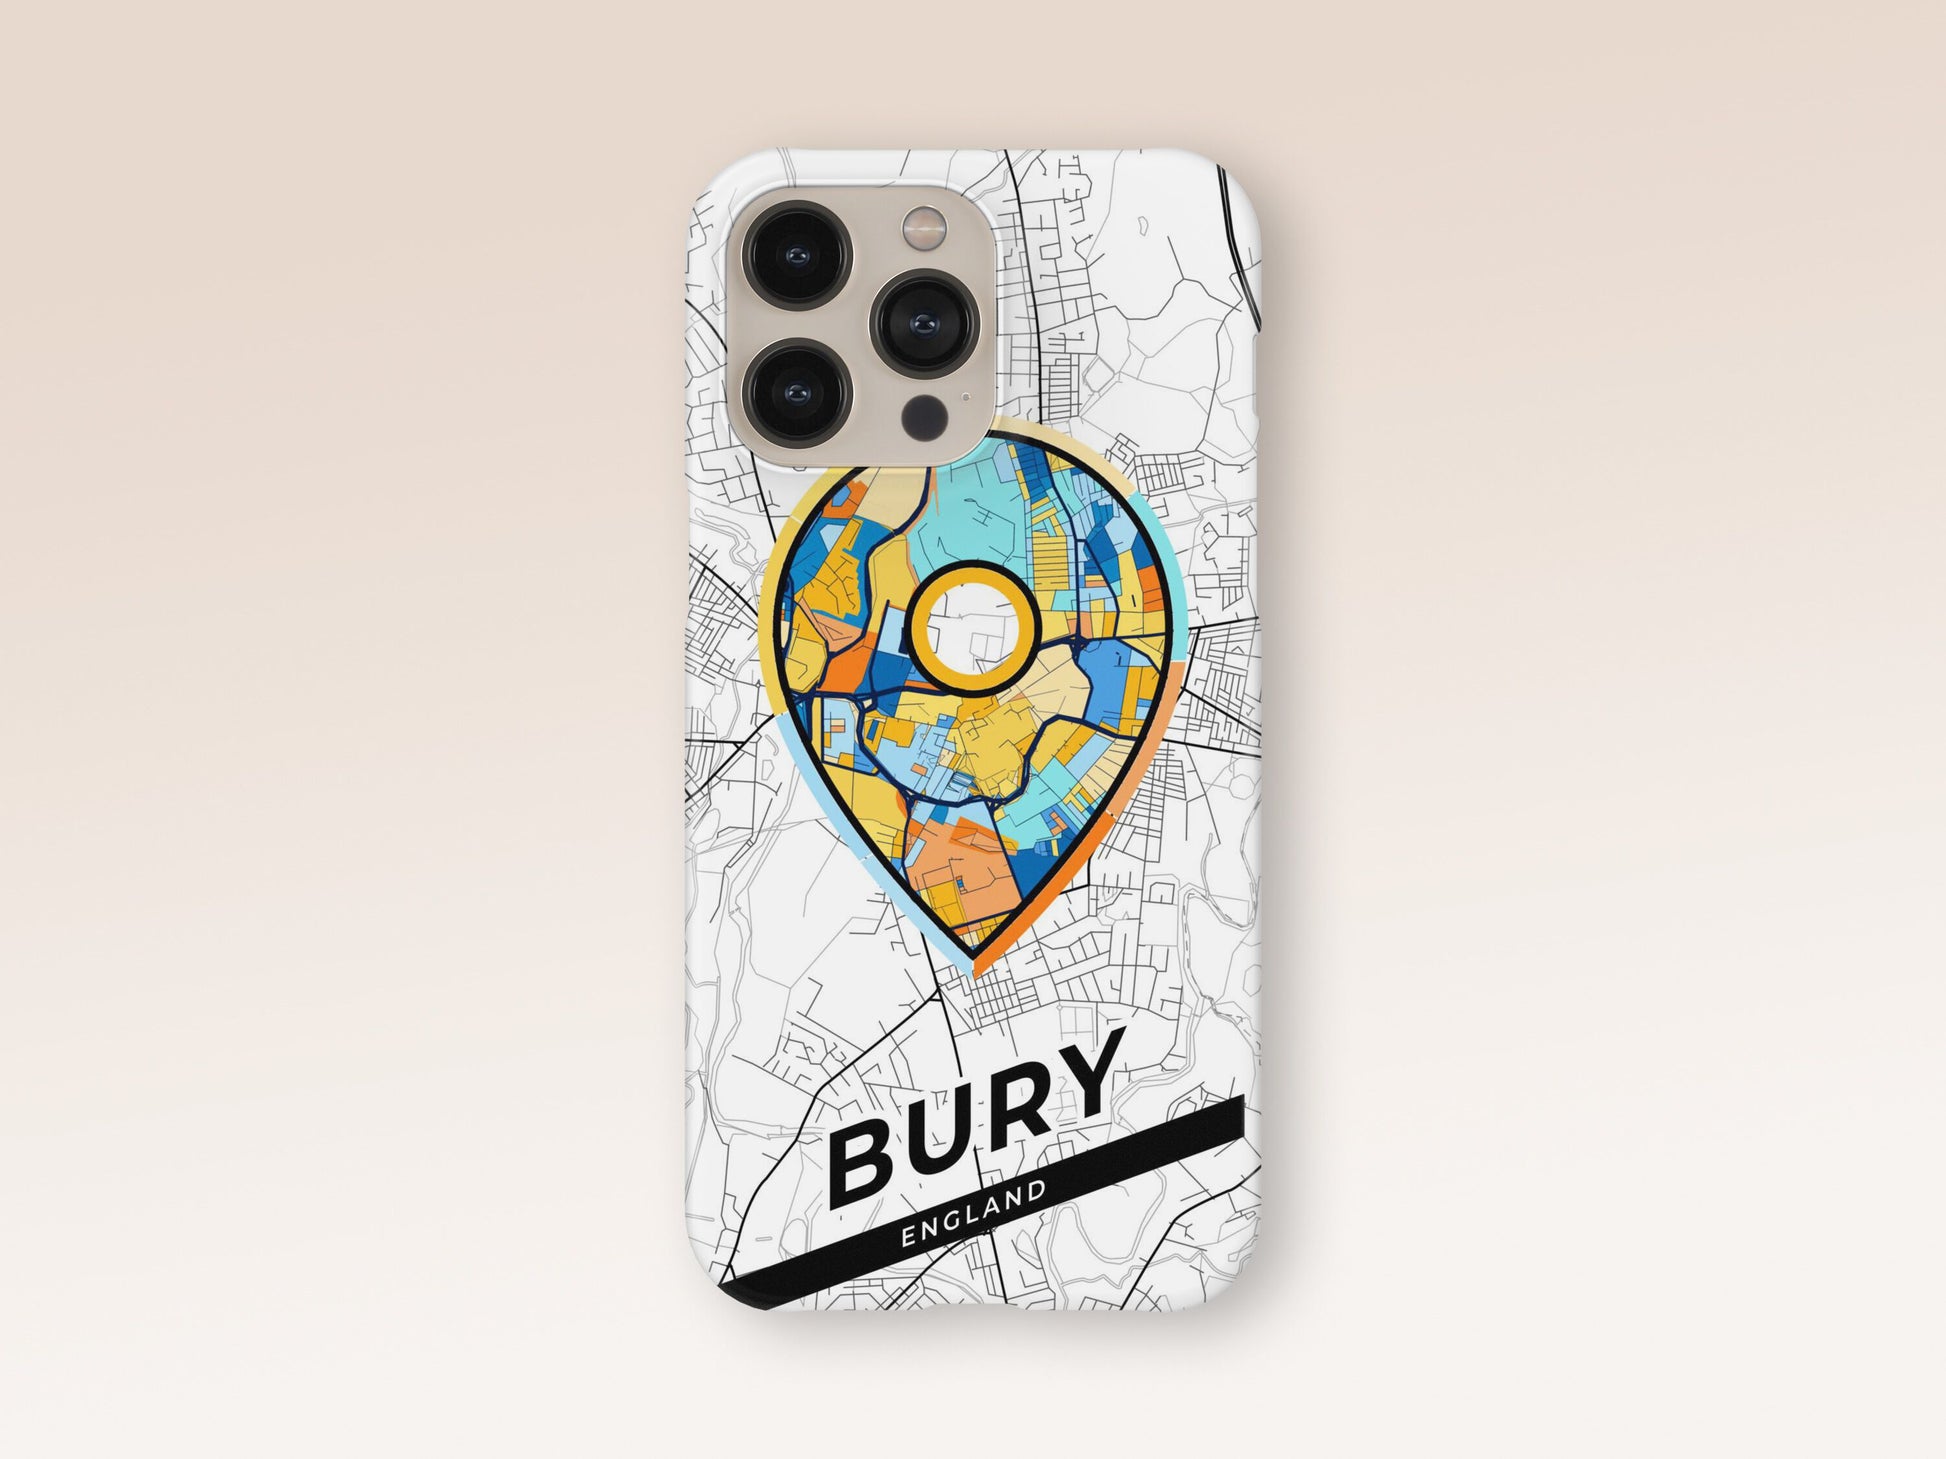 Bury England slim phone case with colorful icon. Birthday, wedding or housewarming gift. Couple match cases. 1